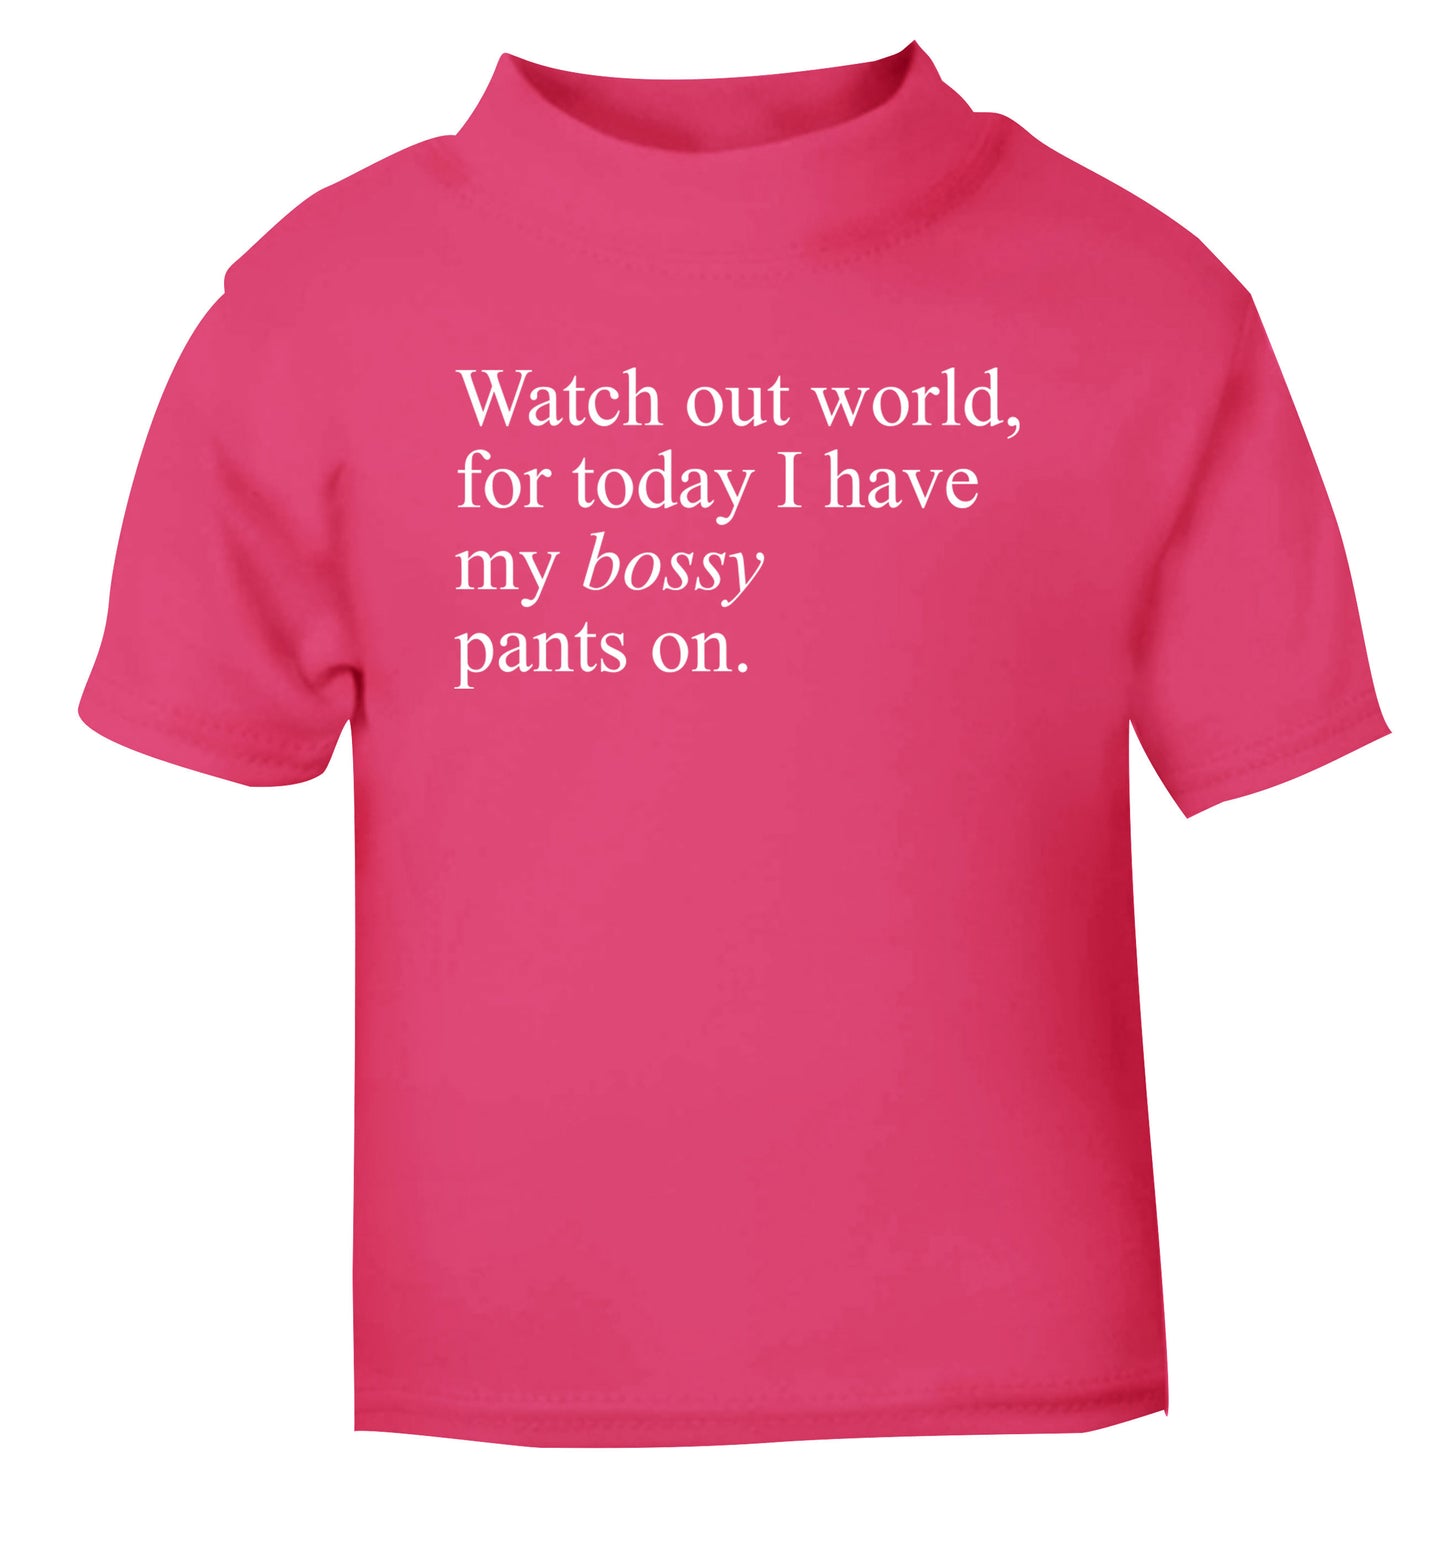 Watch out world, for today I have my bossy pants on pink Baby Toddler Tshirt 2 Years